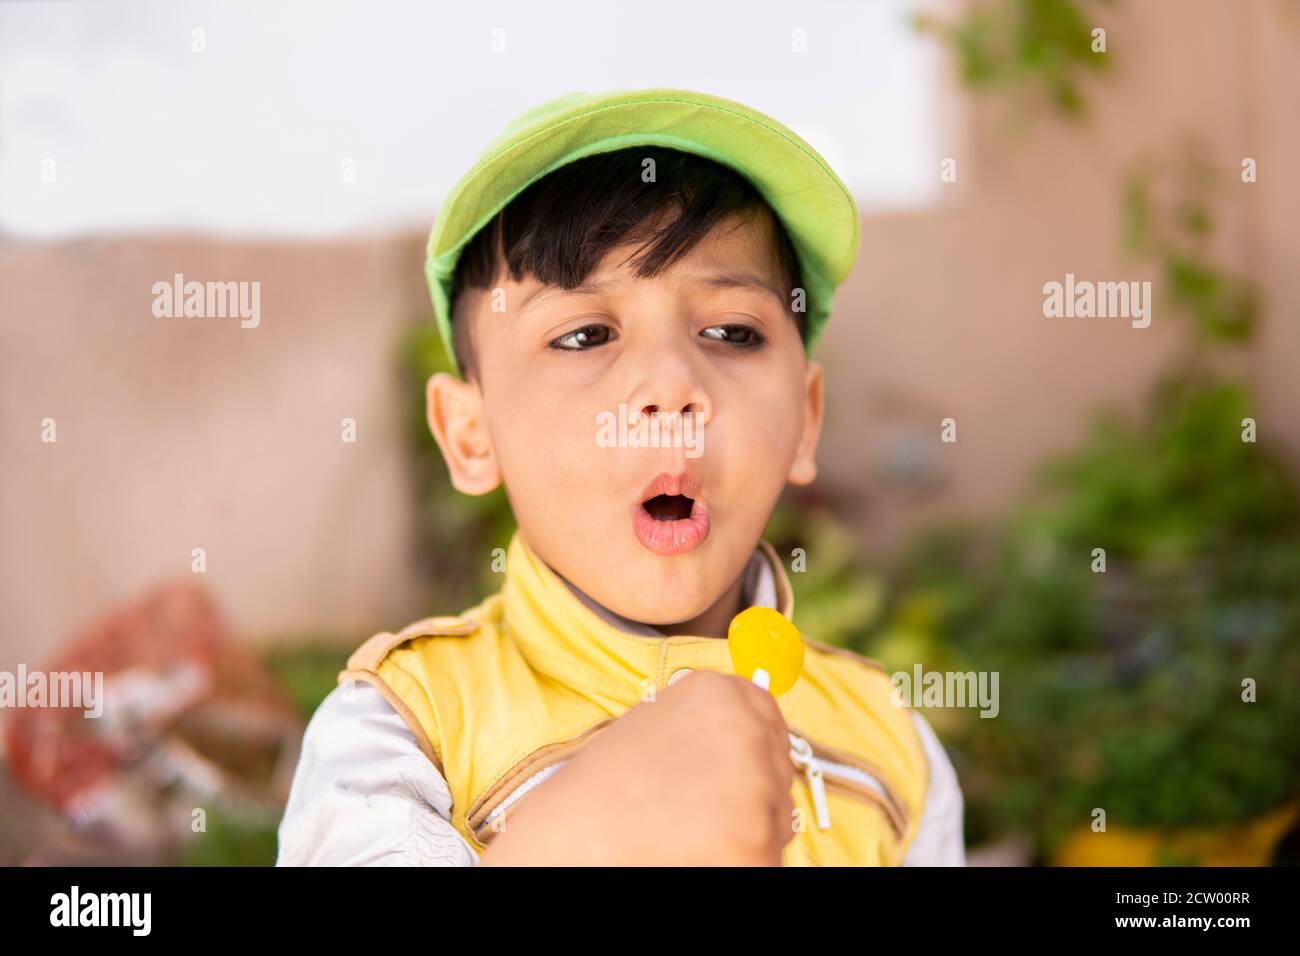 Cut little boy eating lollipop candy and having fun in outdoor at day time. Stock Photo